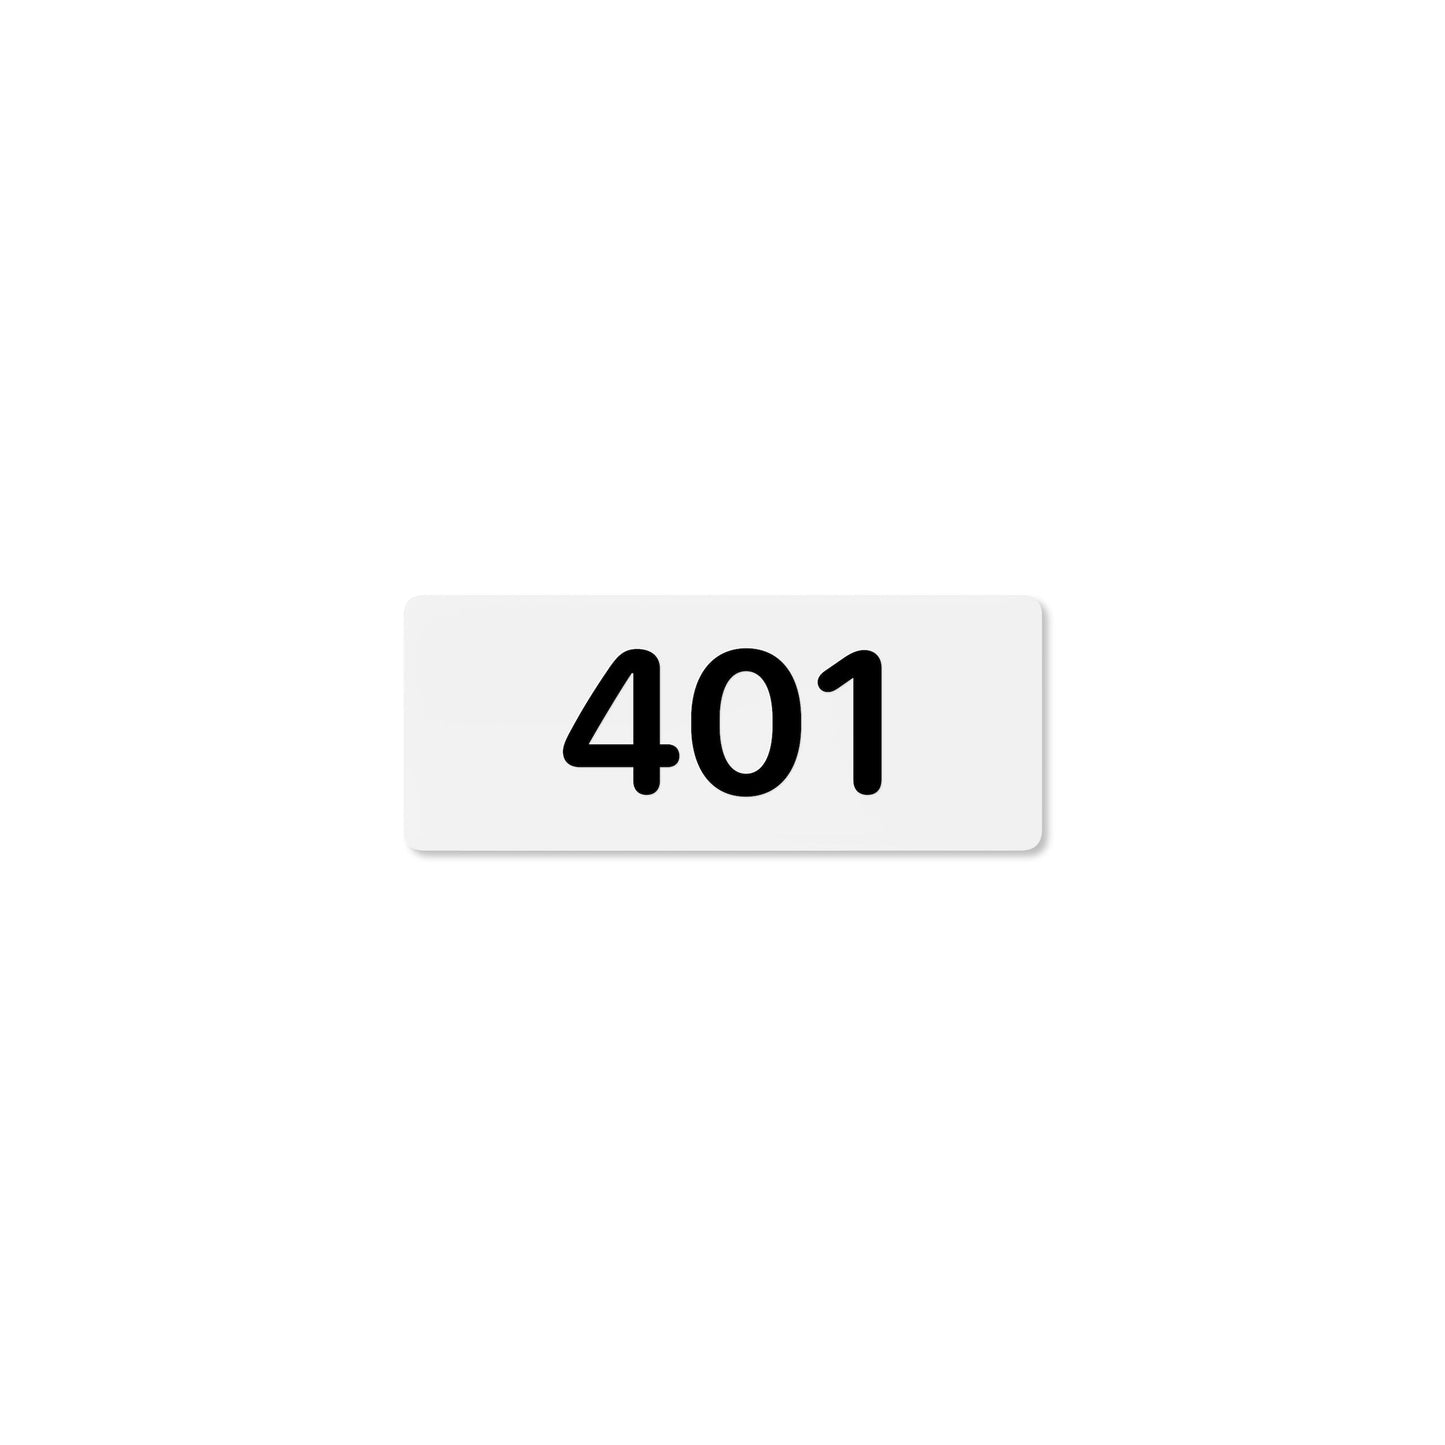 Numeral 401